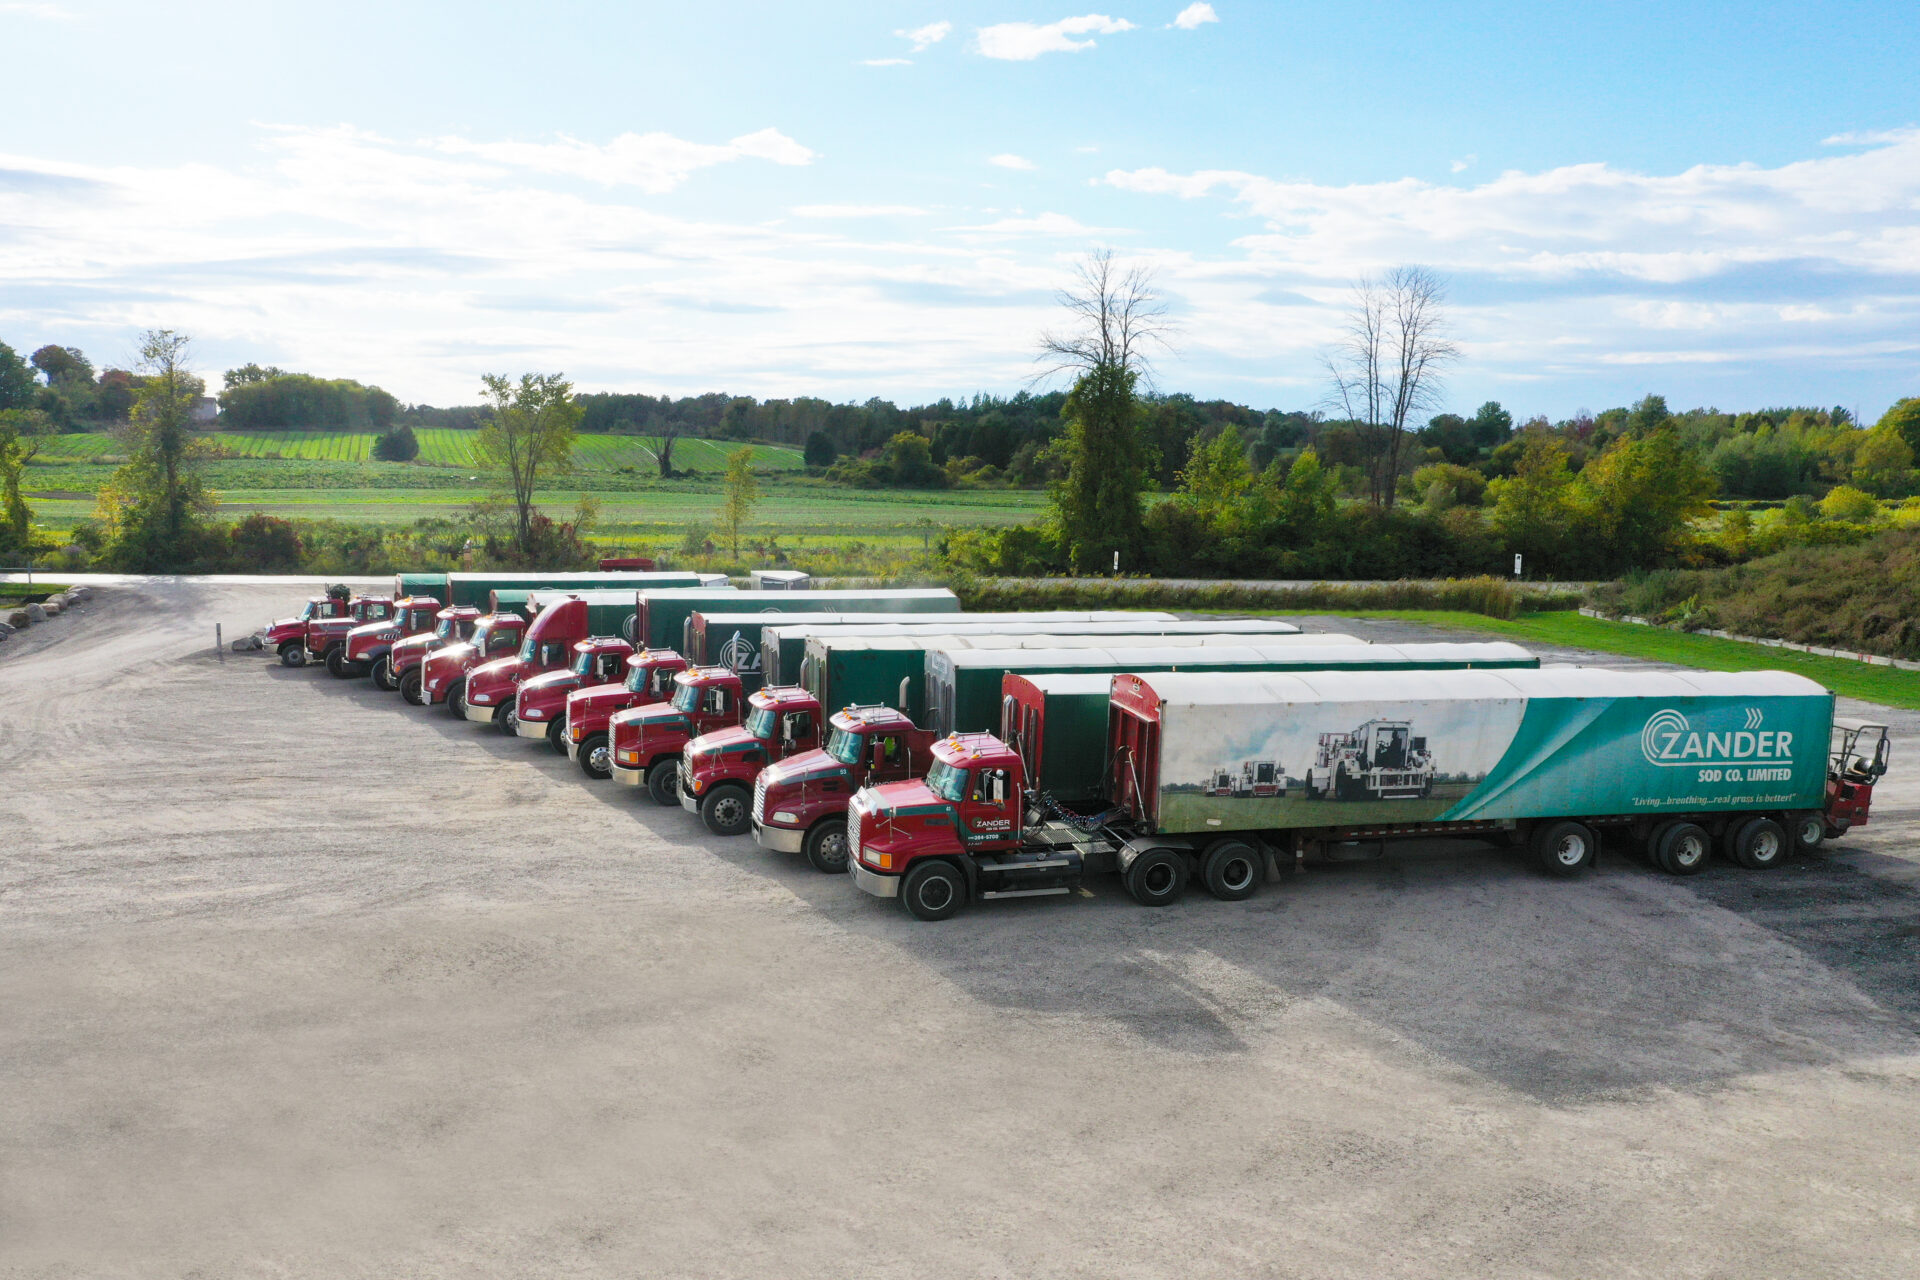 A fleet of red trucks is parked in a line on a gravel lot, with one truck pulling a large green and white trailer.